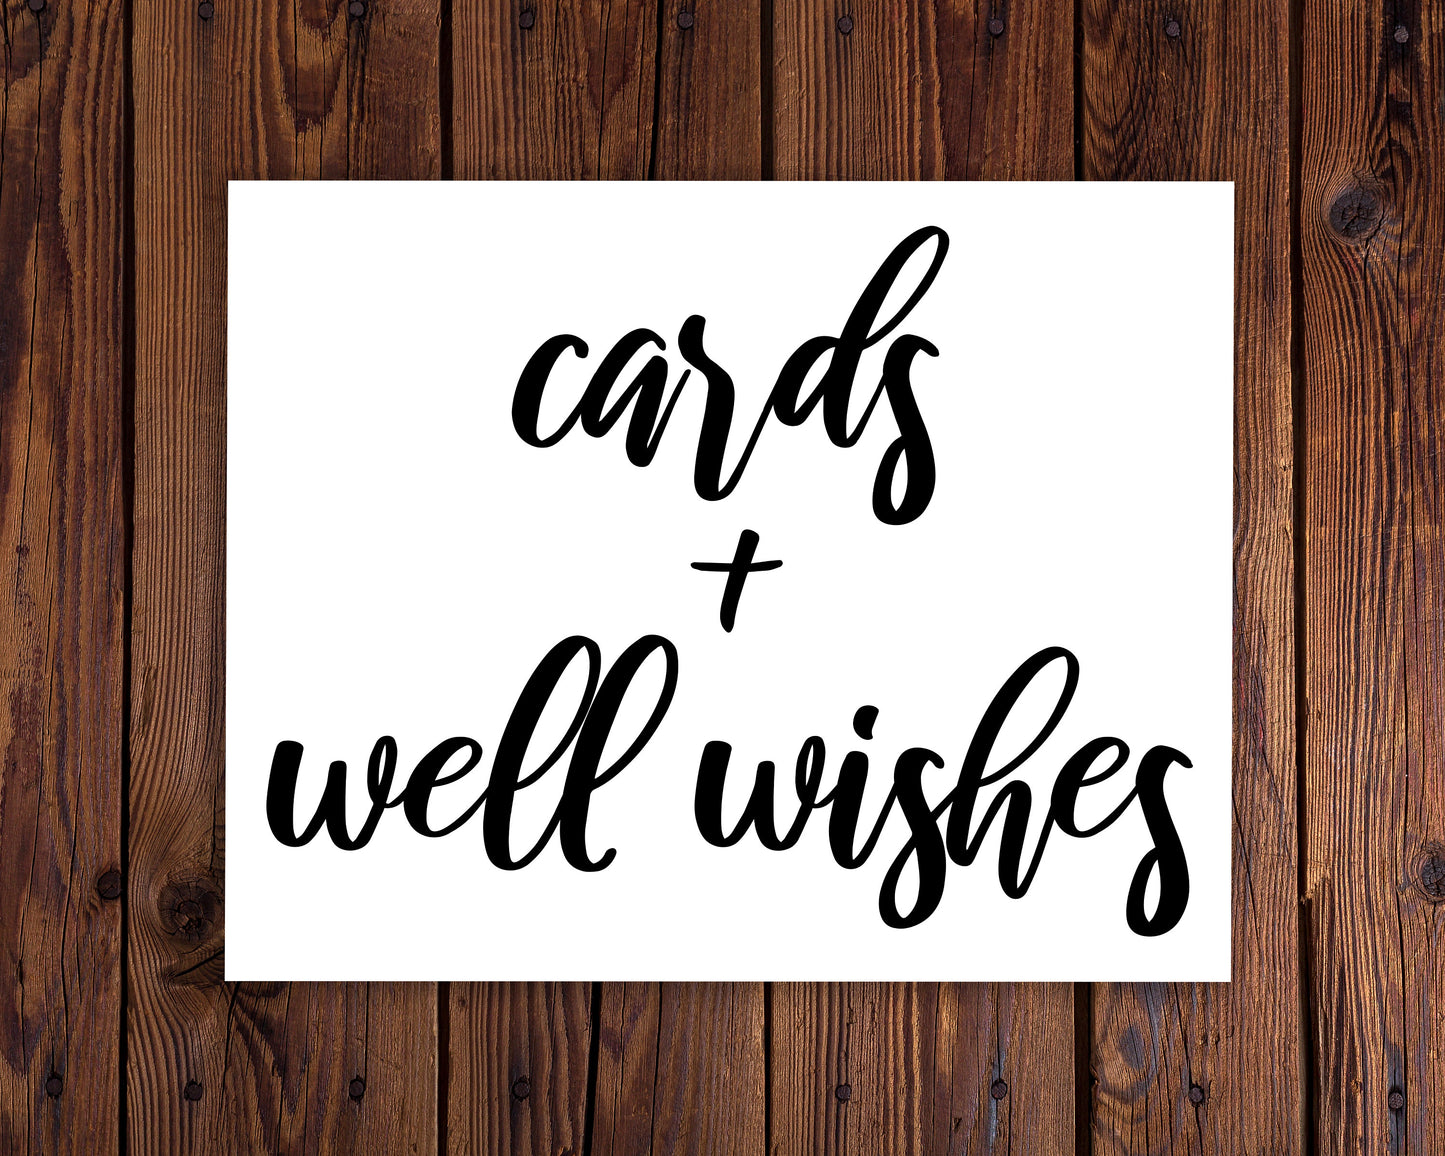 Cards & Well Wishes Decals